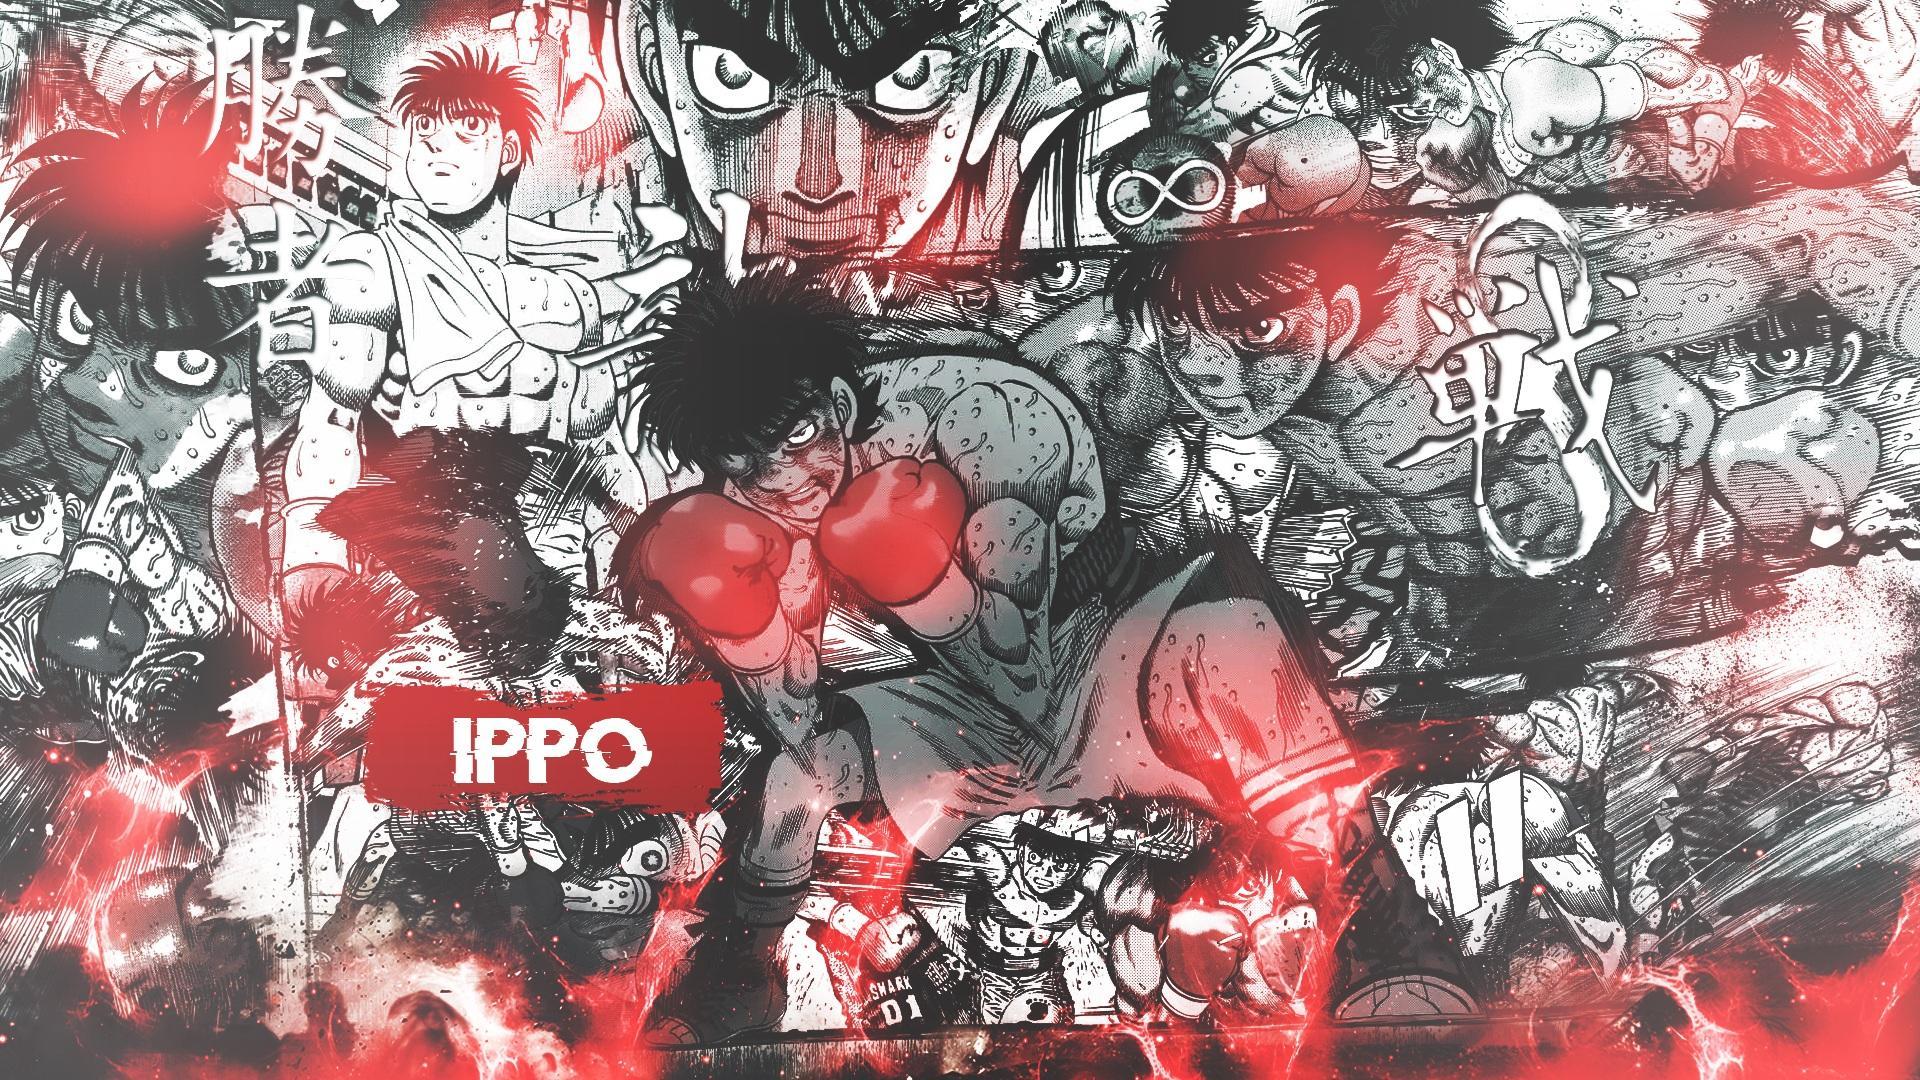 Makunouchi Ippo Anime Wallpapers - Wallpaper Cave